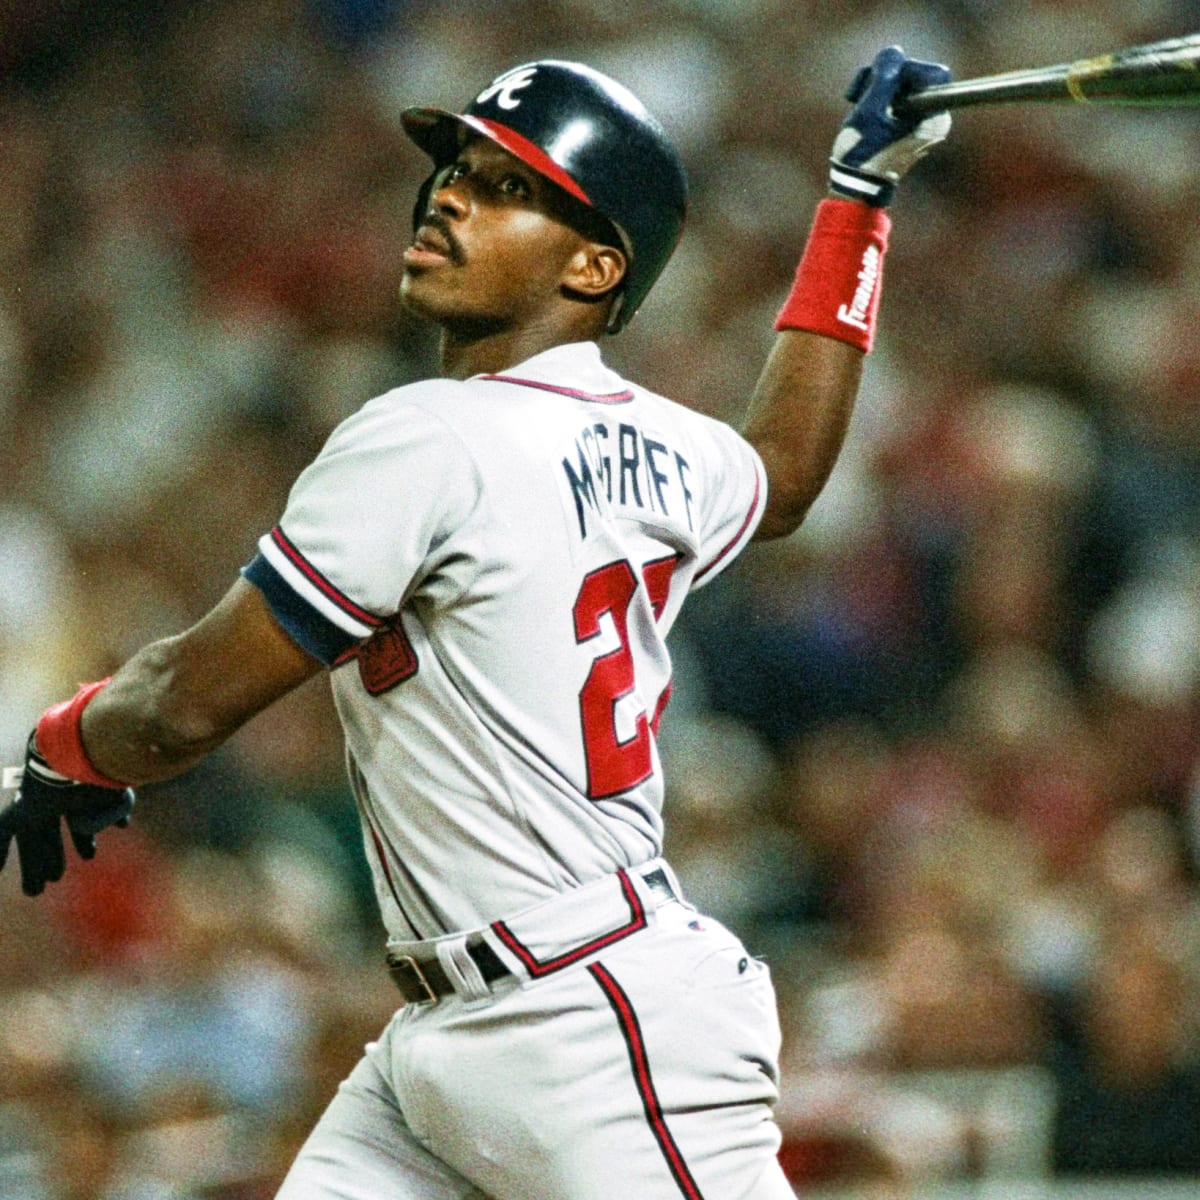 Fred McGriff Among Candidates on Upcoming Contemporary Era Ballot